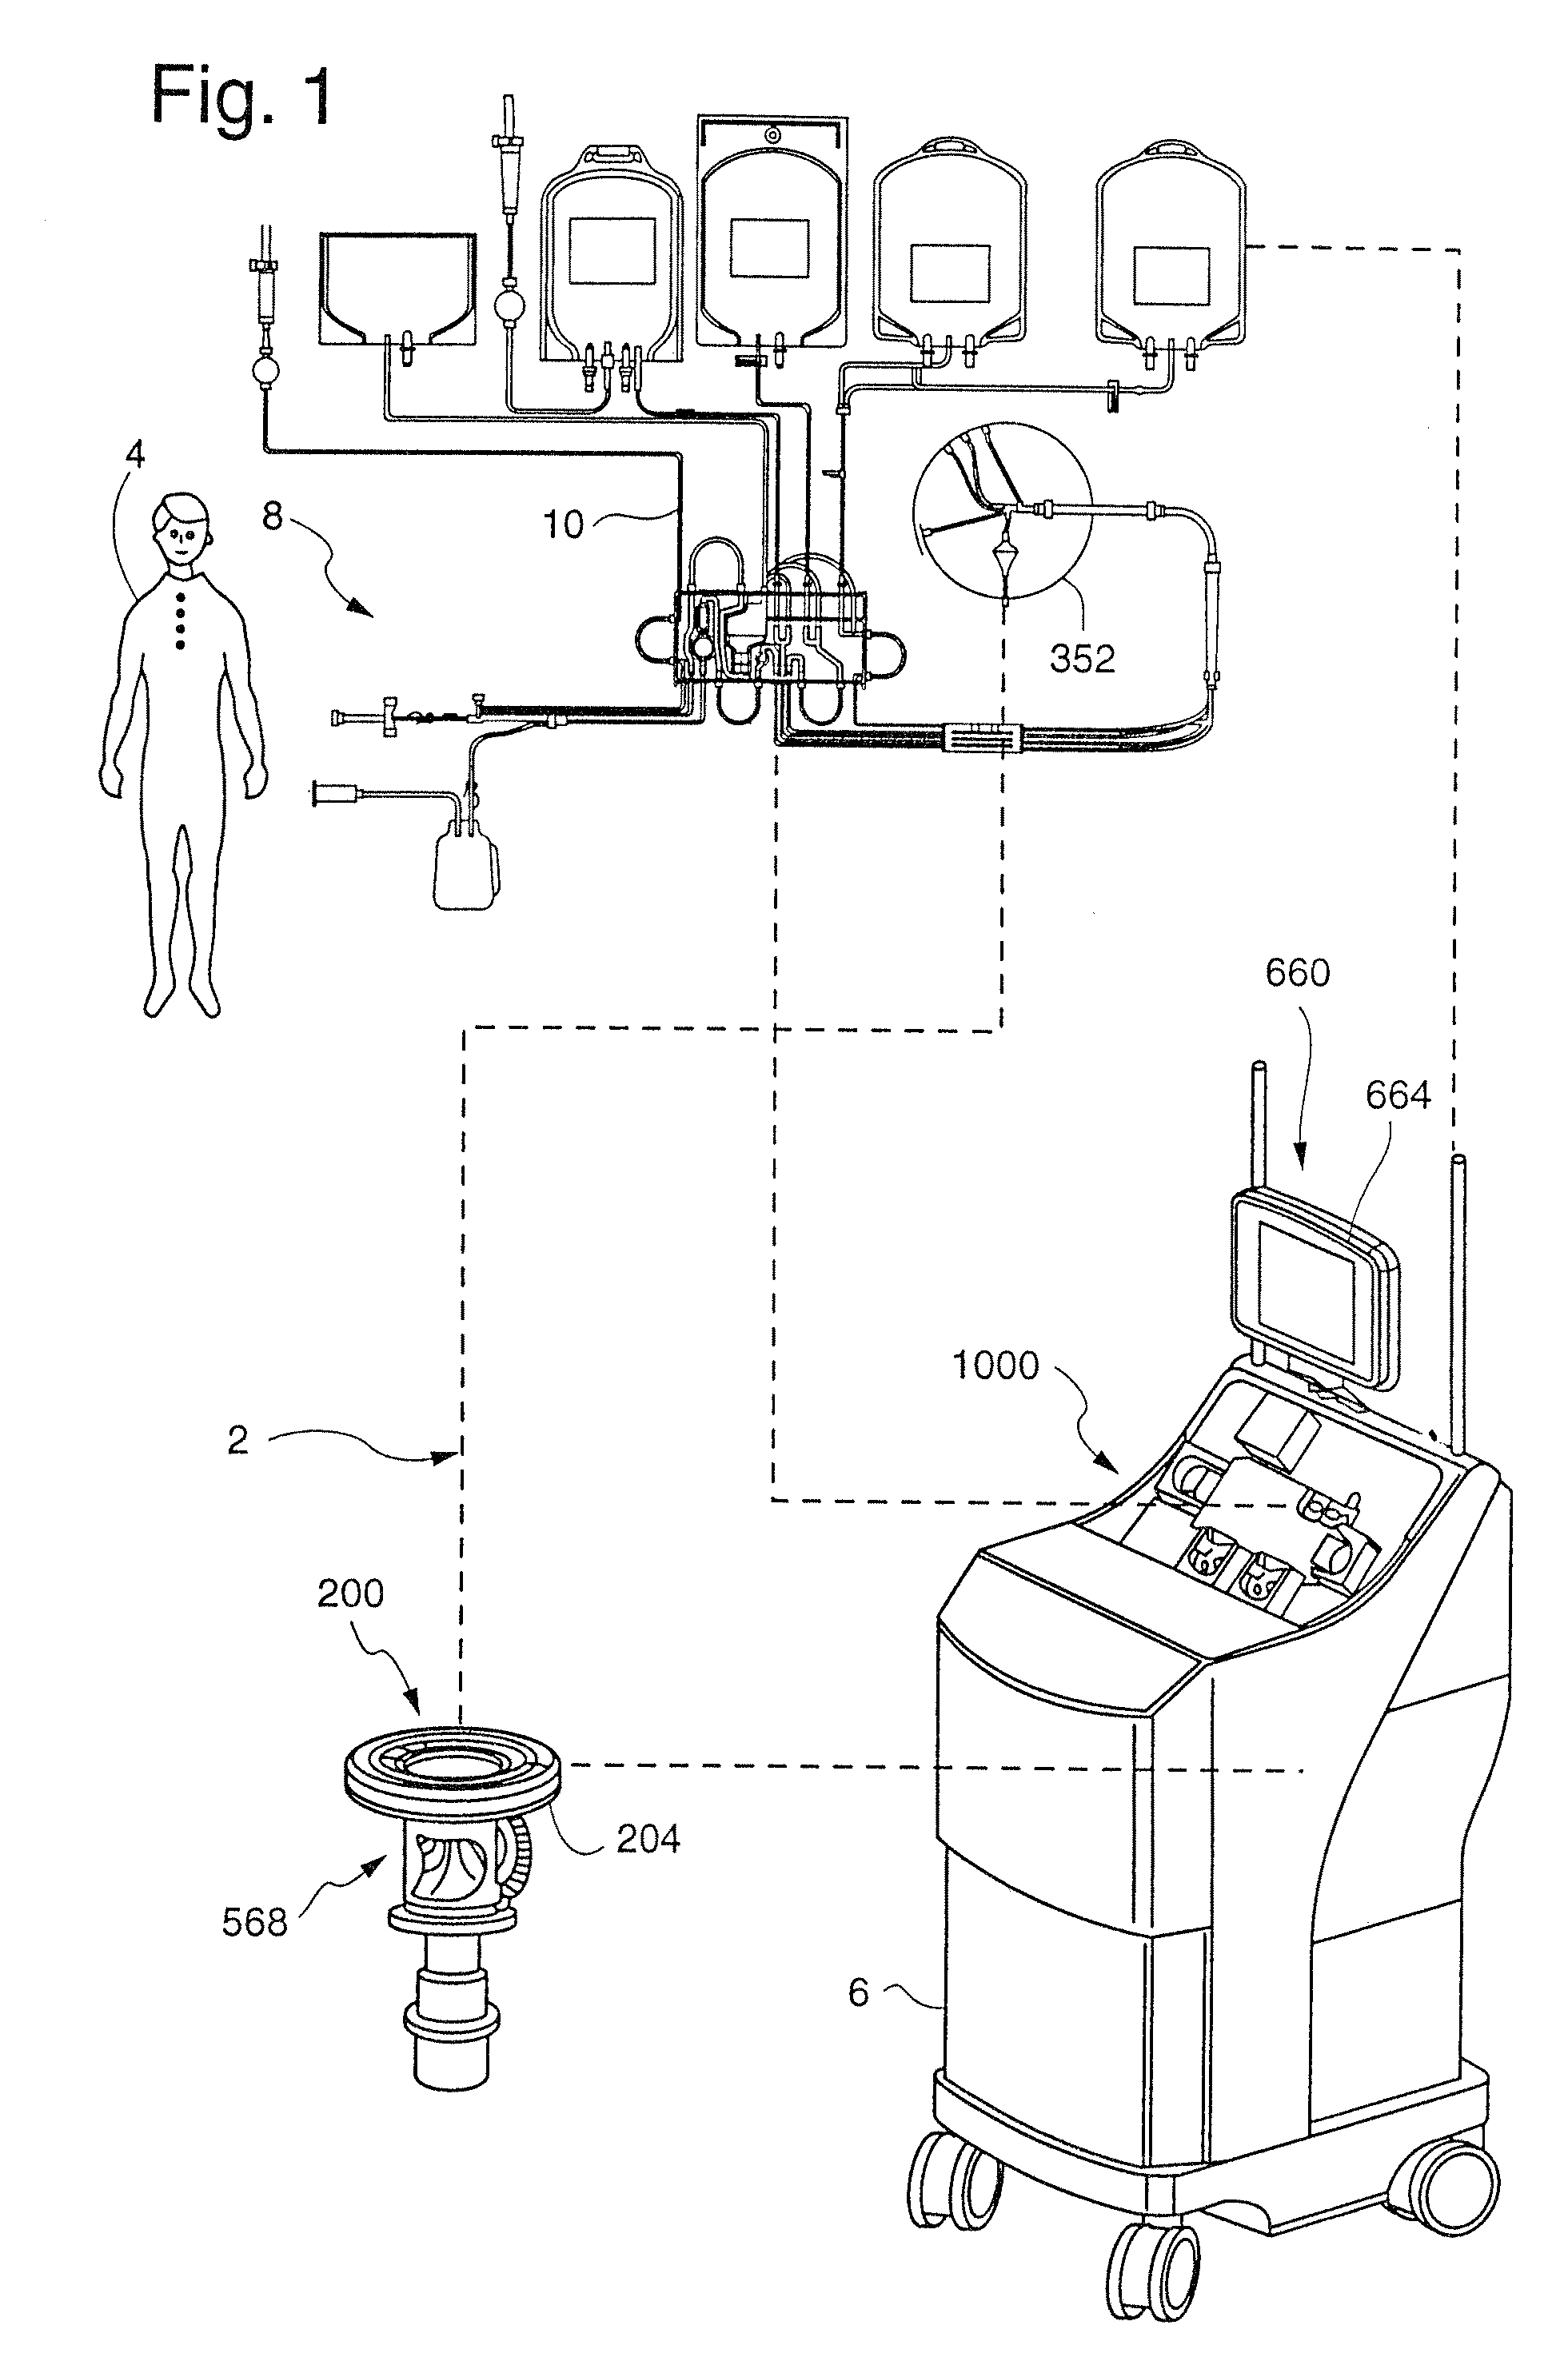 Extra-corporeal blood processing method and apparatus based on donor characteristics